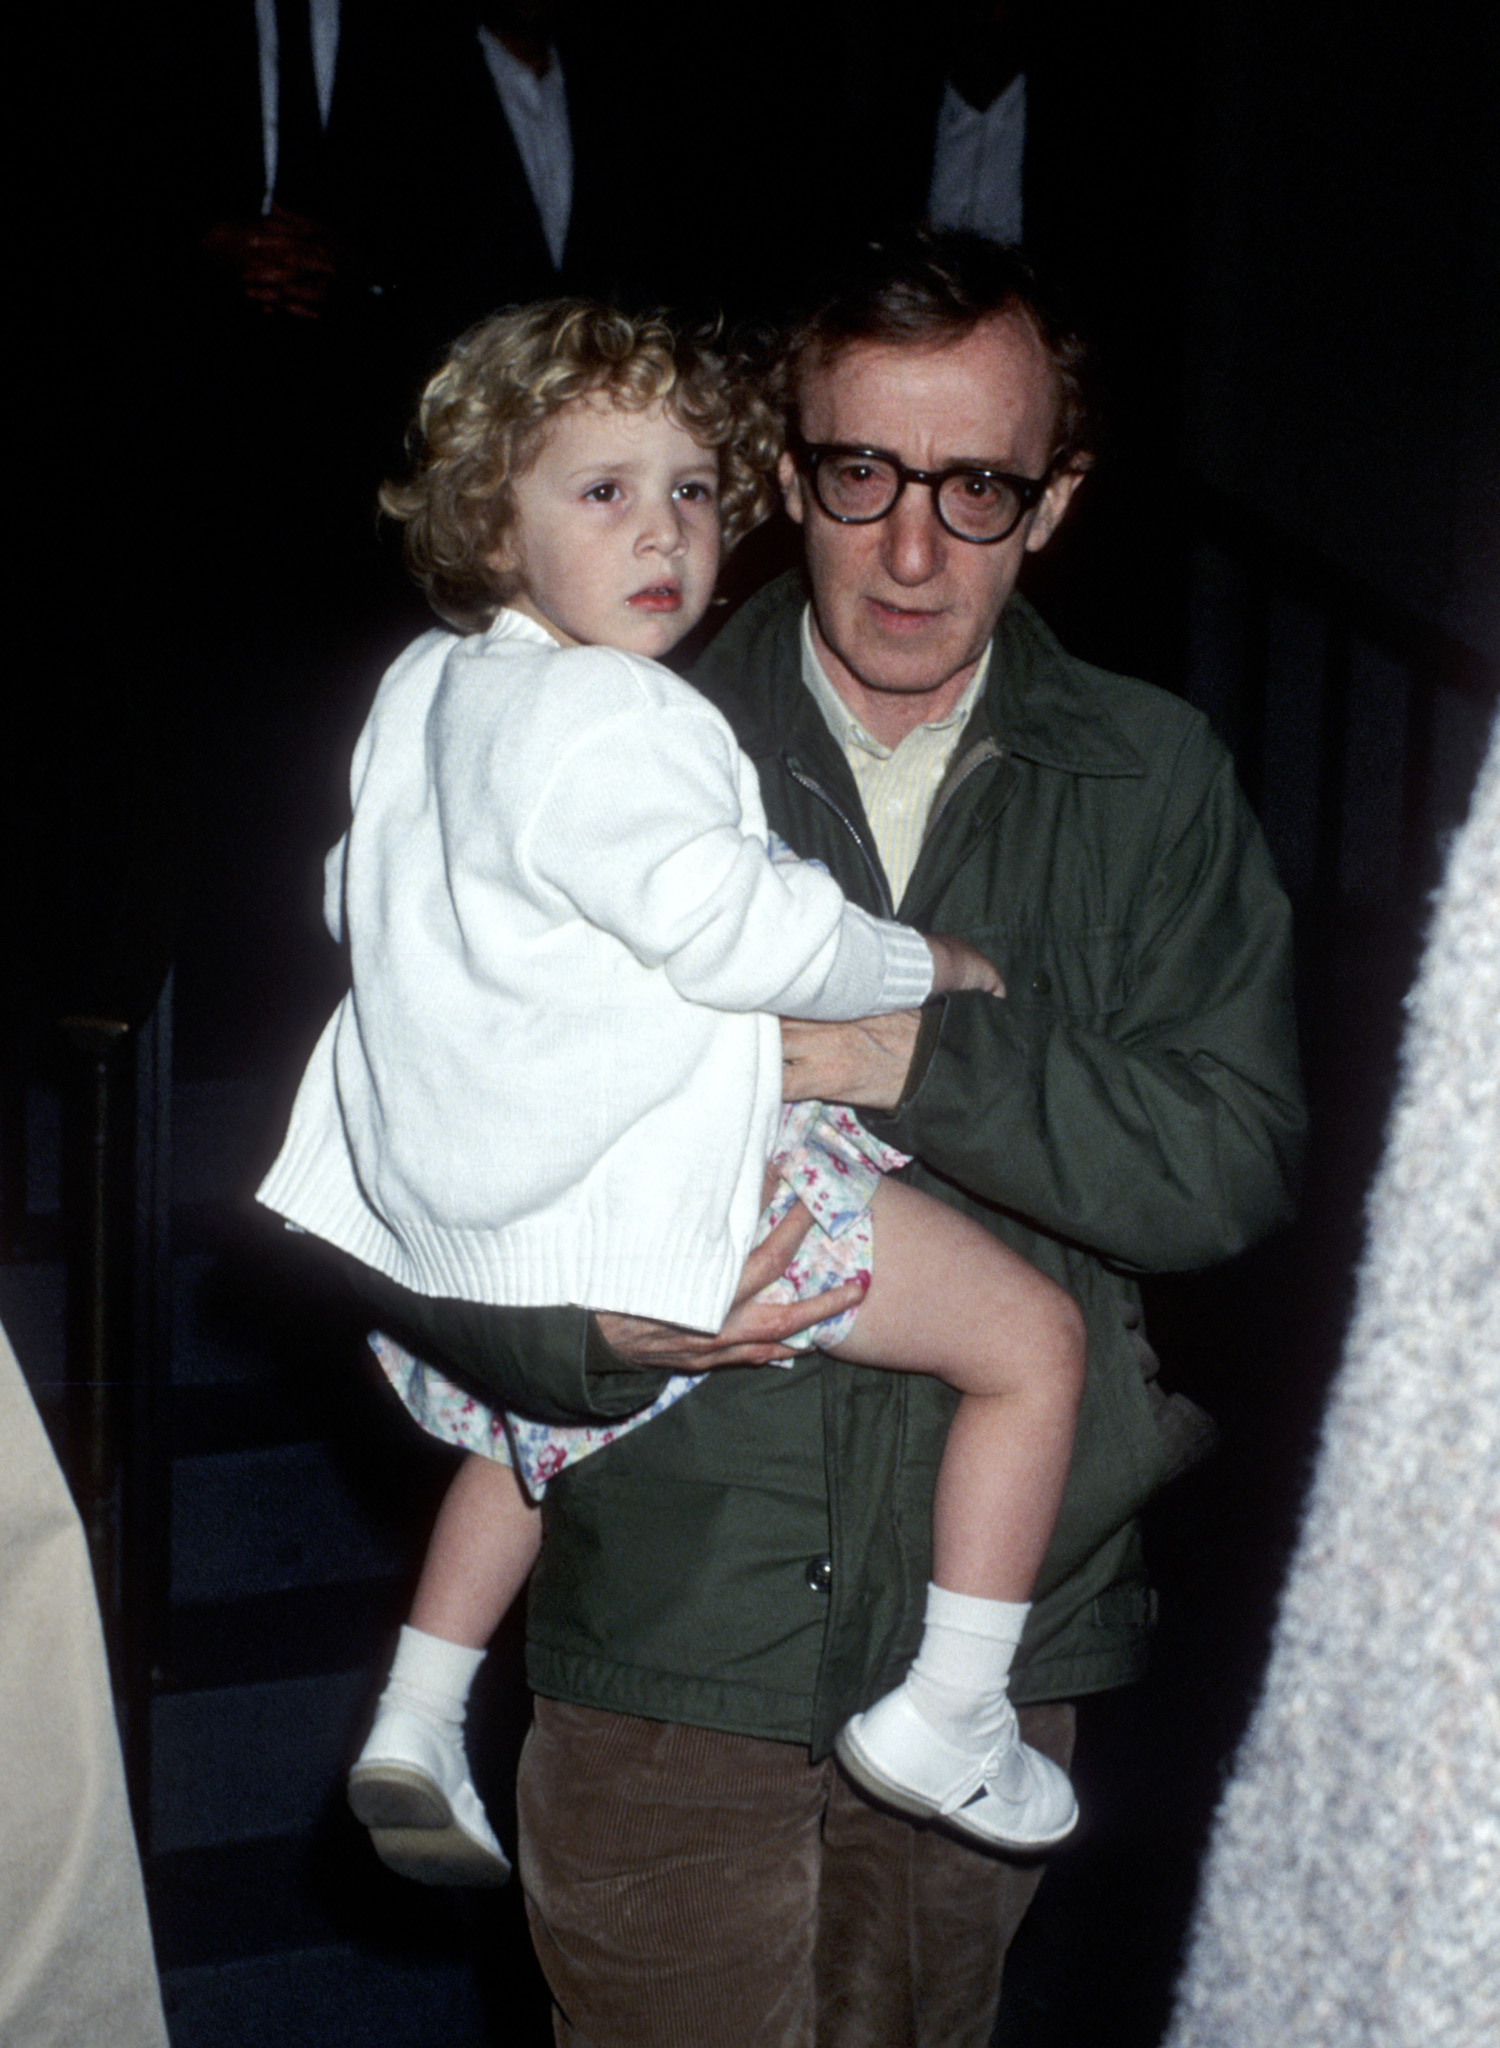 Woody Allen and Dylan Farrow at Mia Farrow's apartment in New York City on May 2, 1989